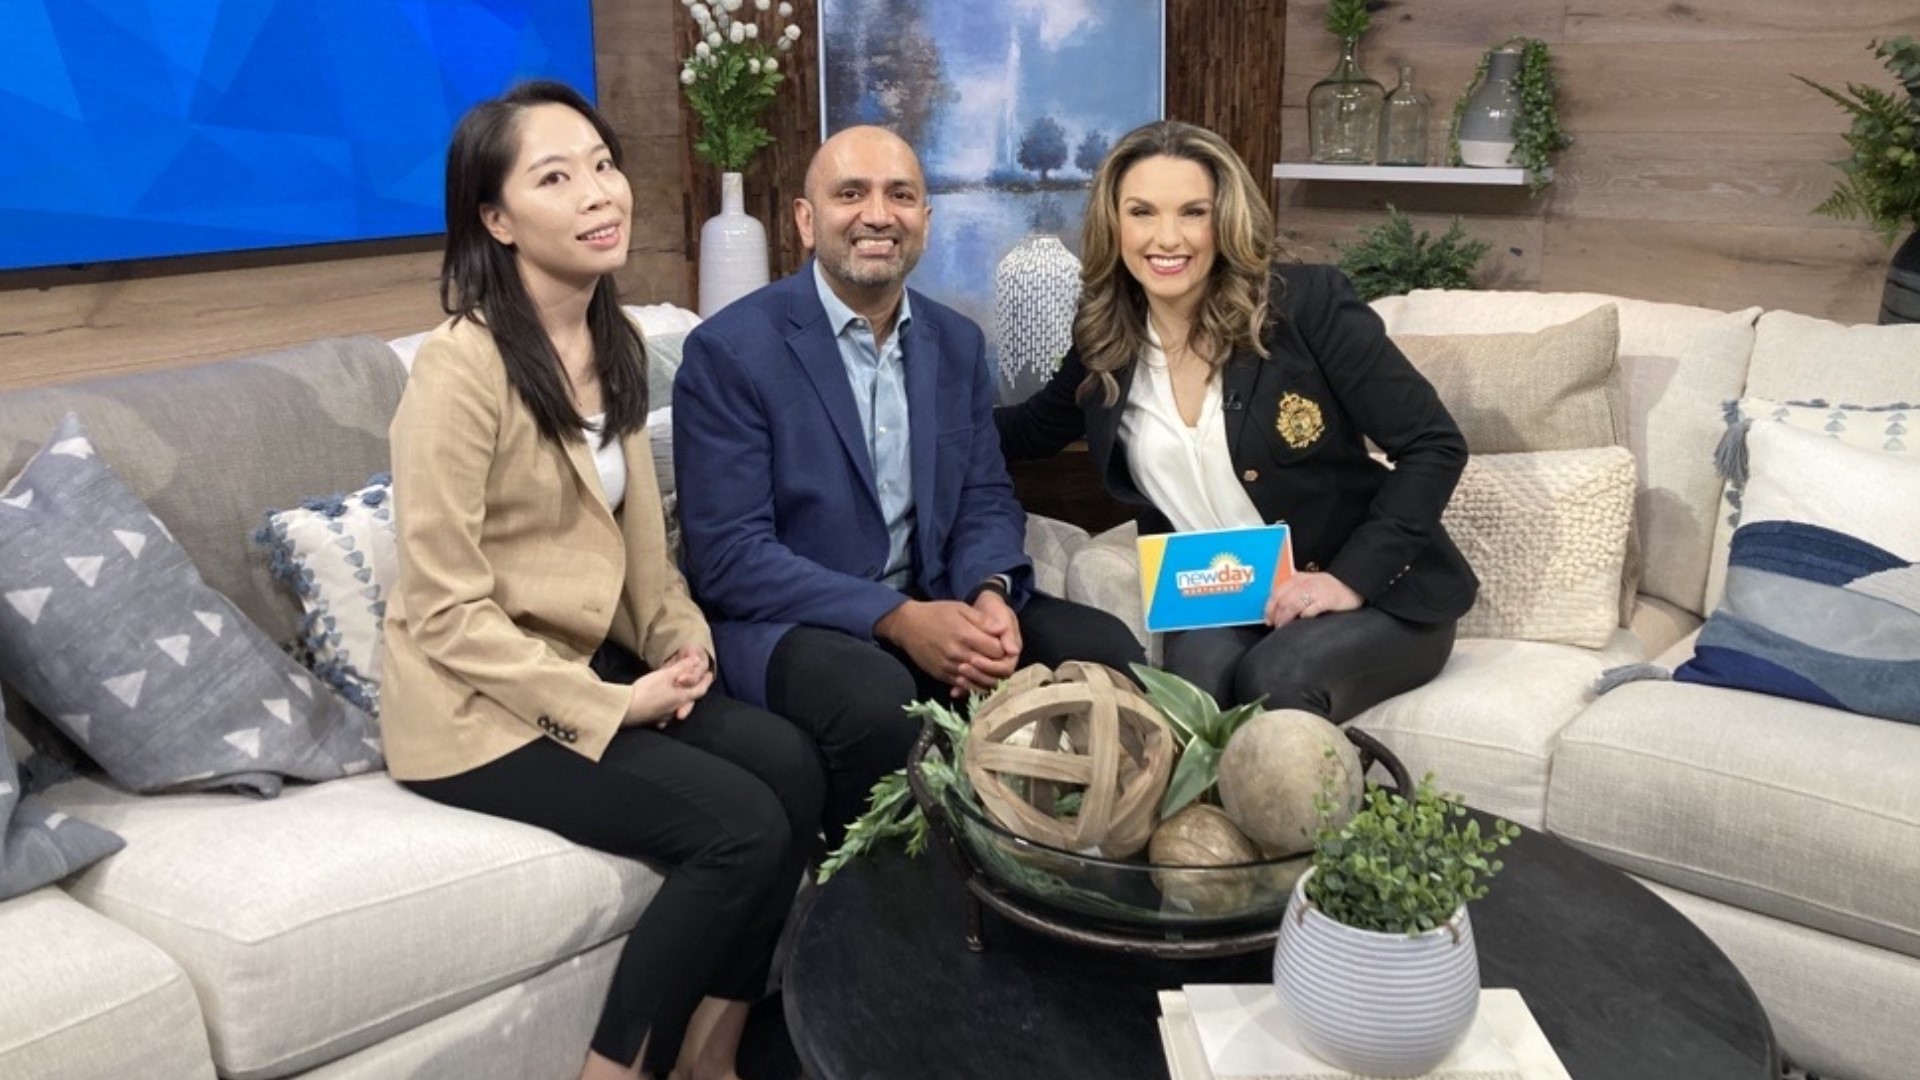 Seattle University marketing professors Matthew Isaac and Jennifer Hong joined the show to discuss their favorite and least favorite Super Bowl ads. #newdaynw